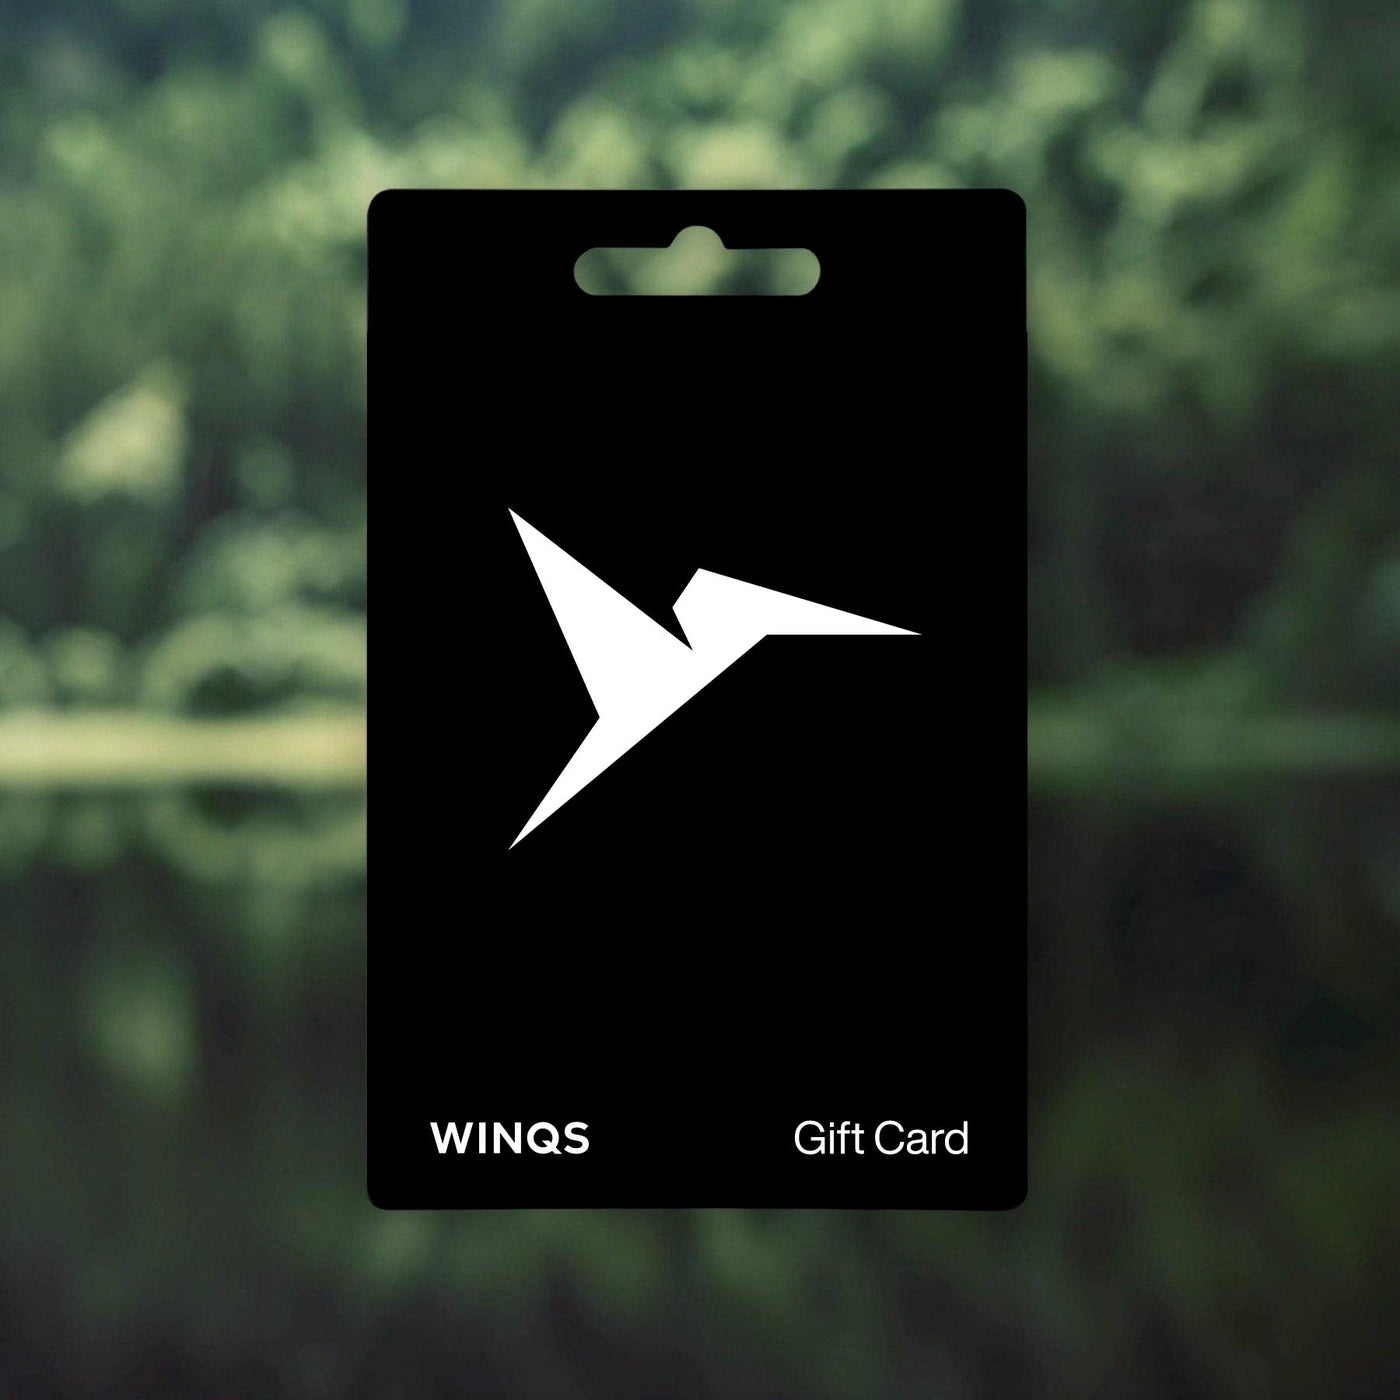 WINQS Gift Card